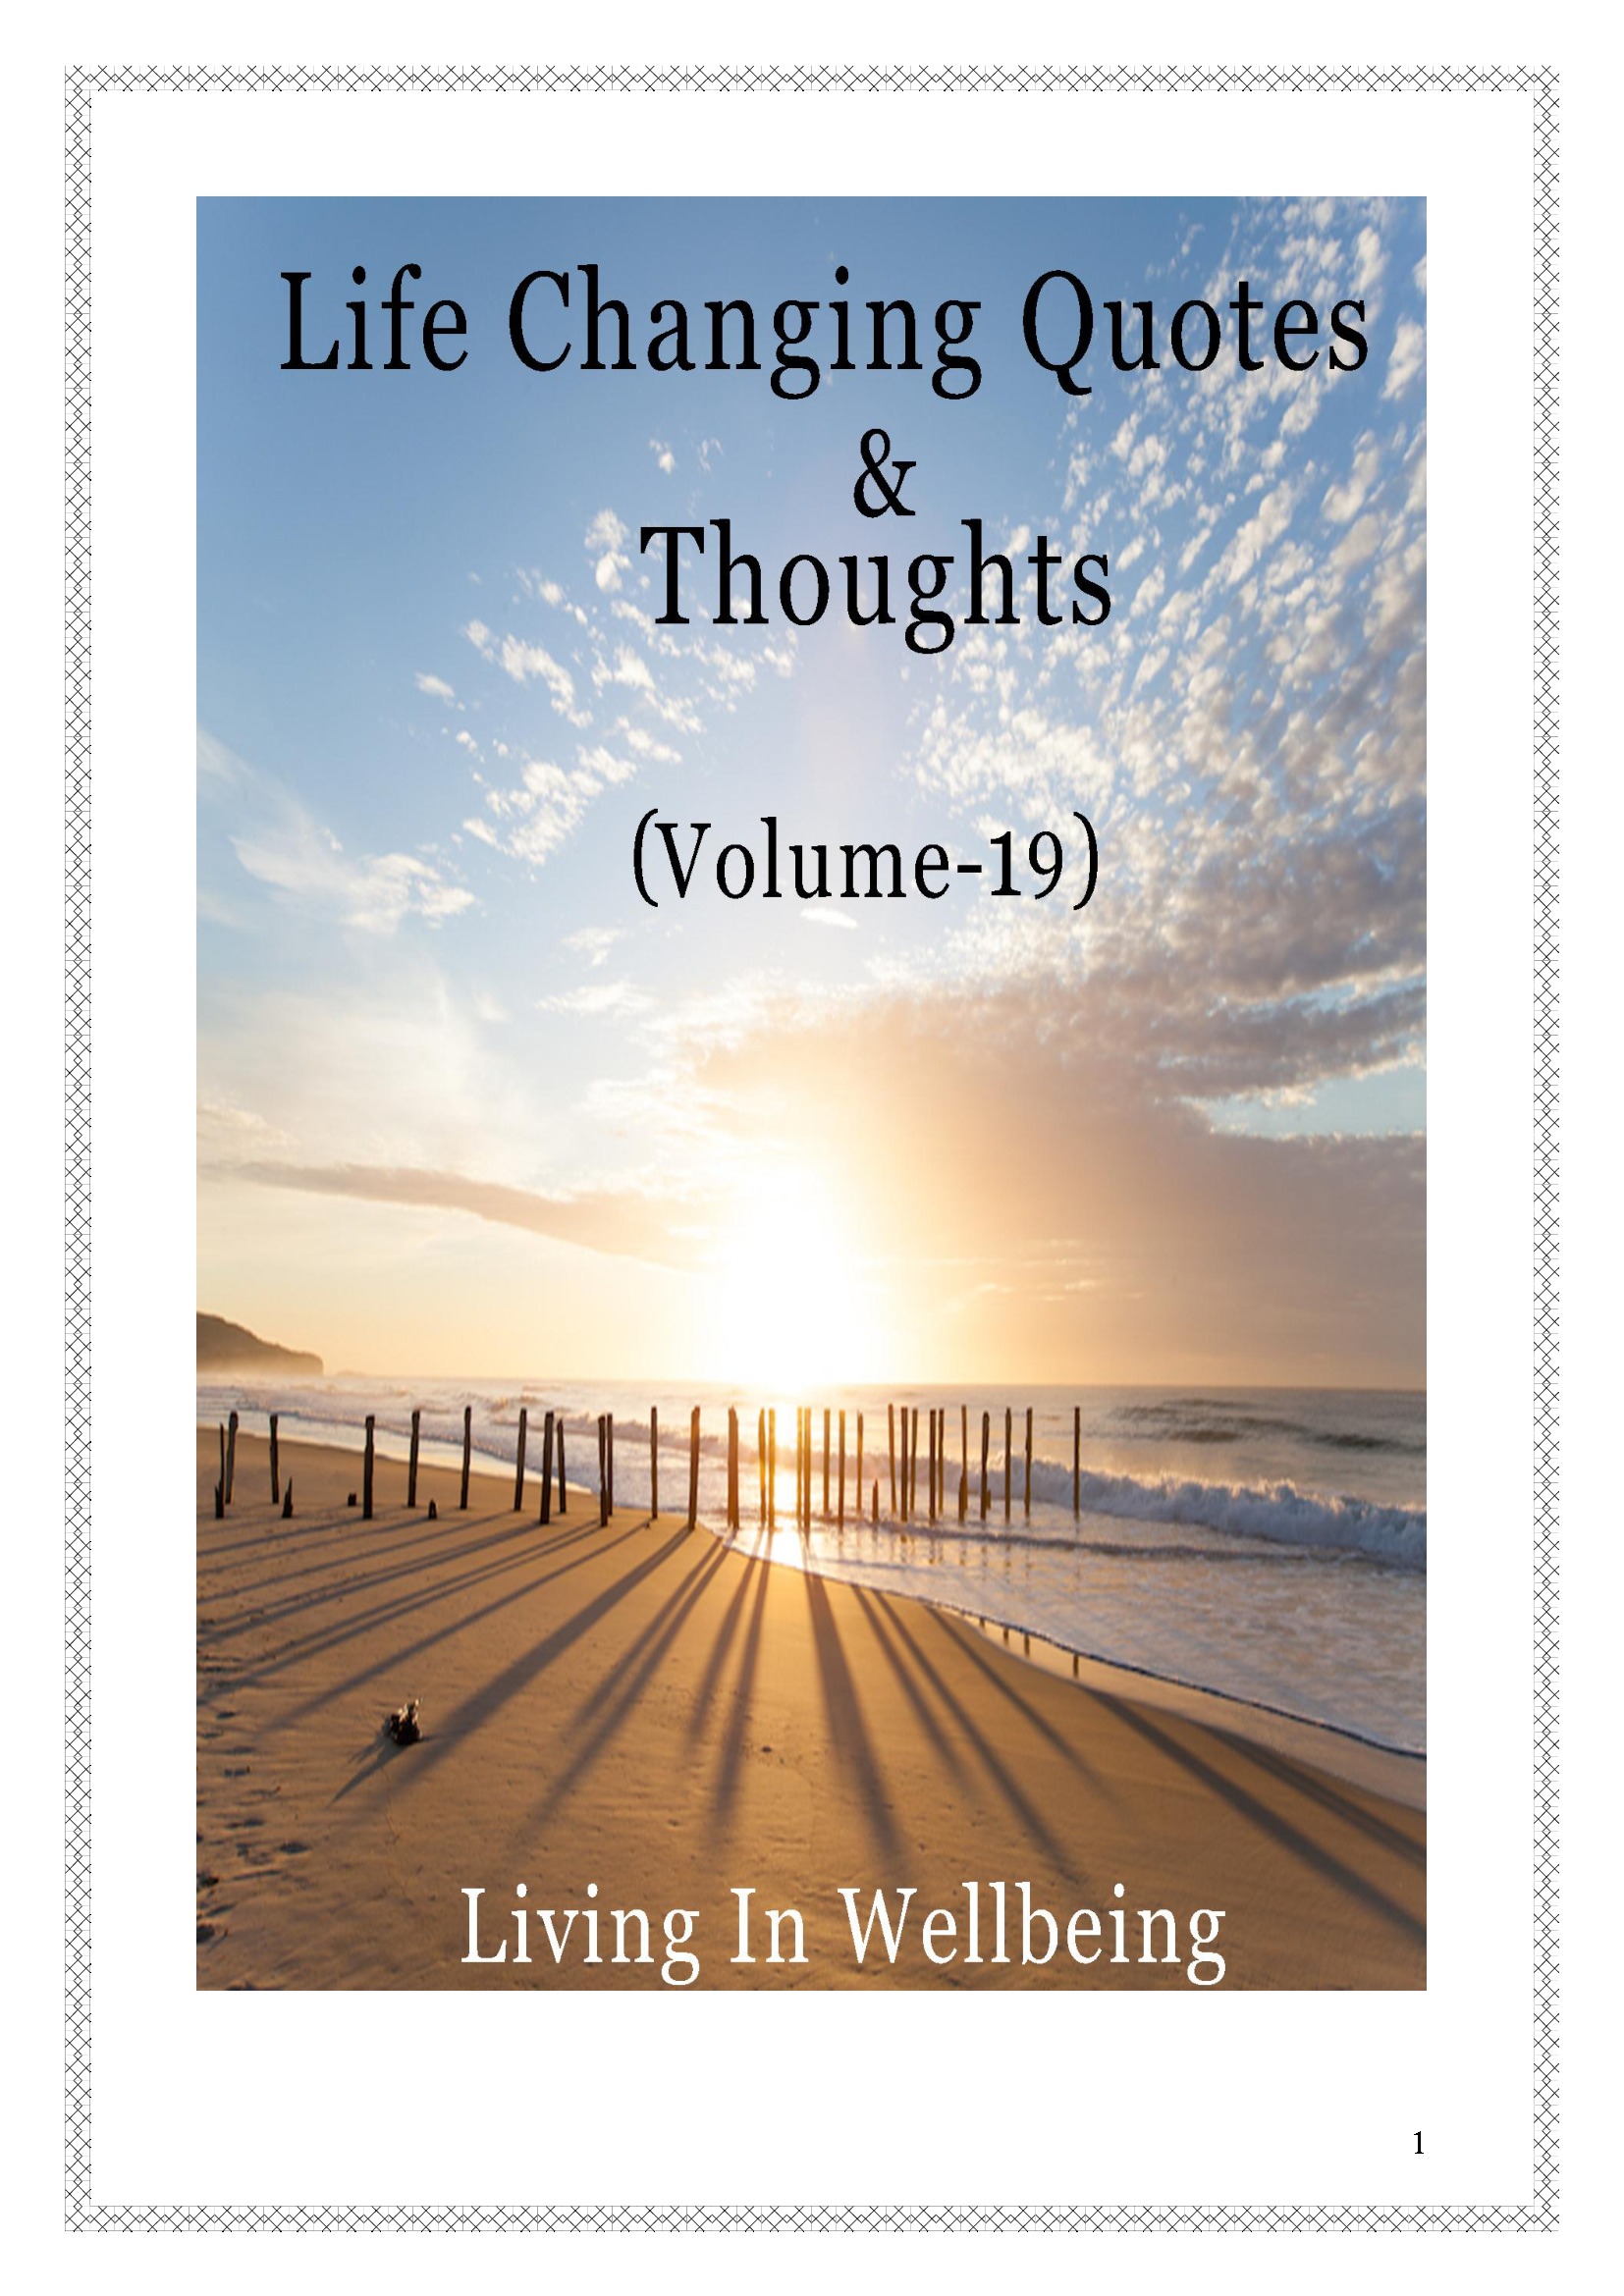 Life Changing Quotes & Thoughts (Volume 19) | Pothi.com